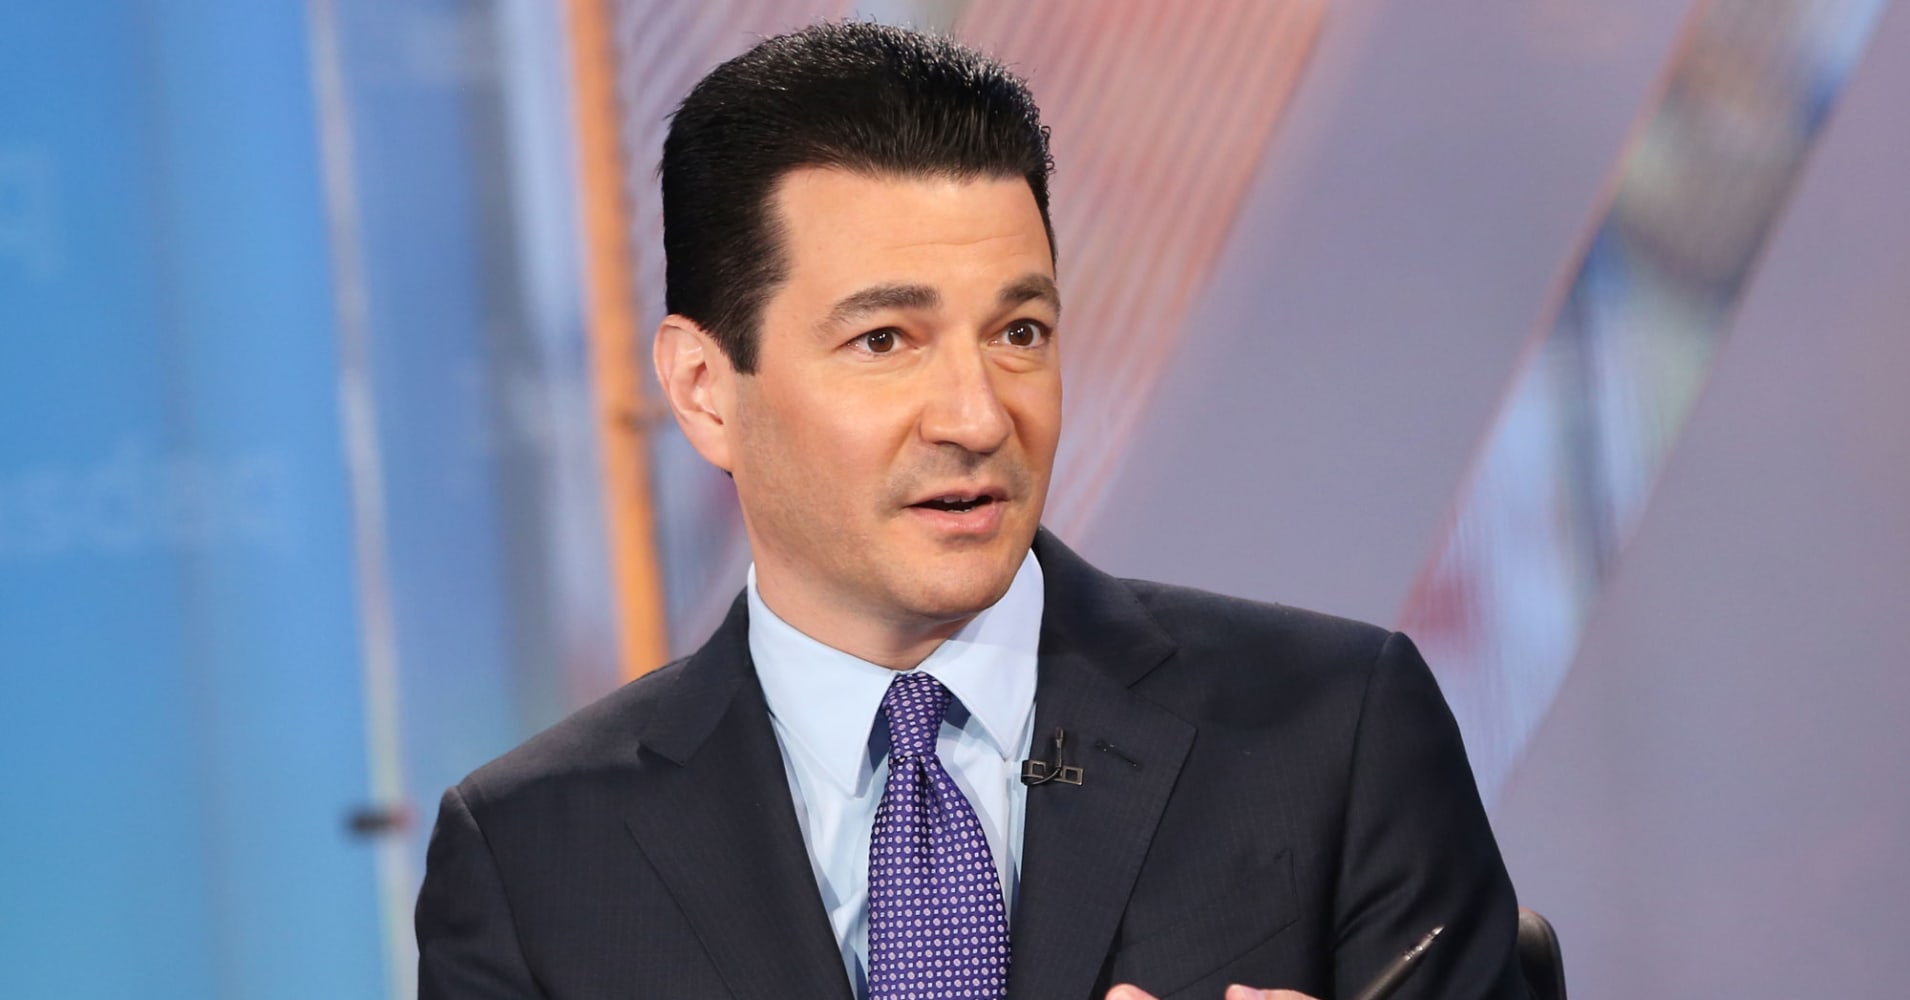 FDA to overhaul more than 40-year-old process for approving medical devices amid scrutiny